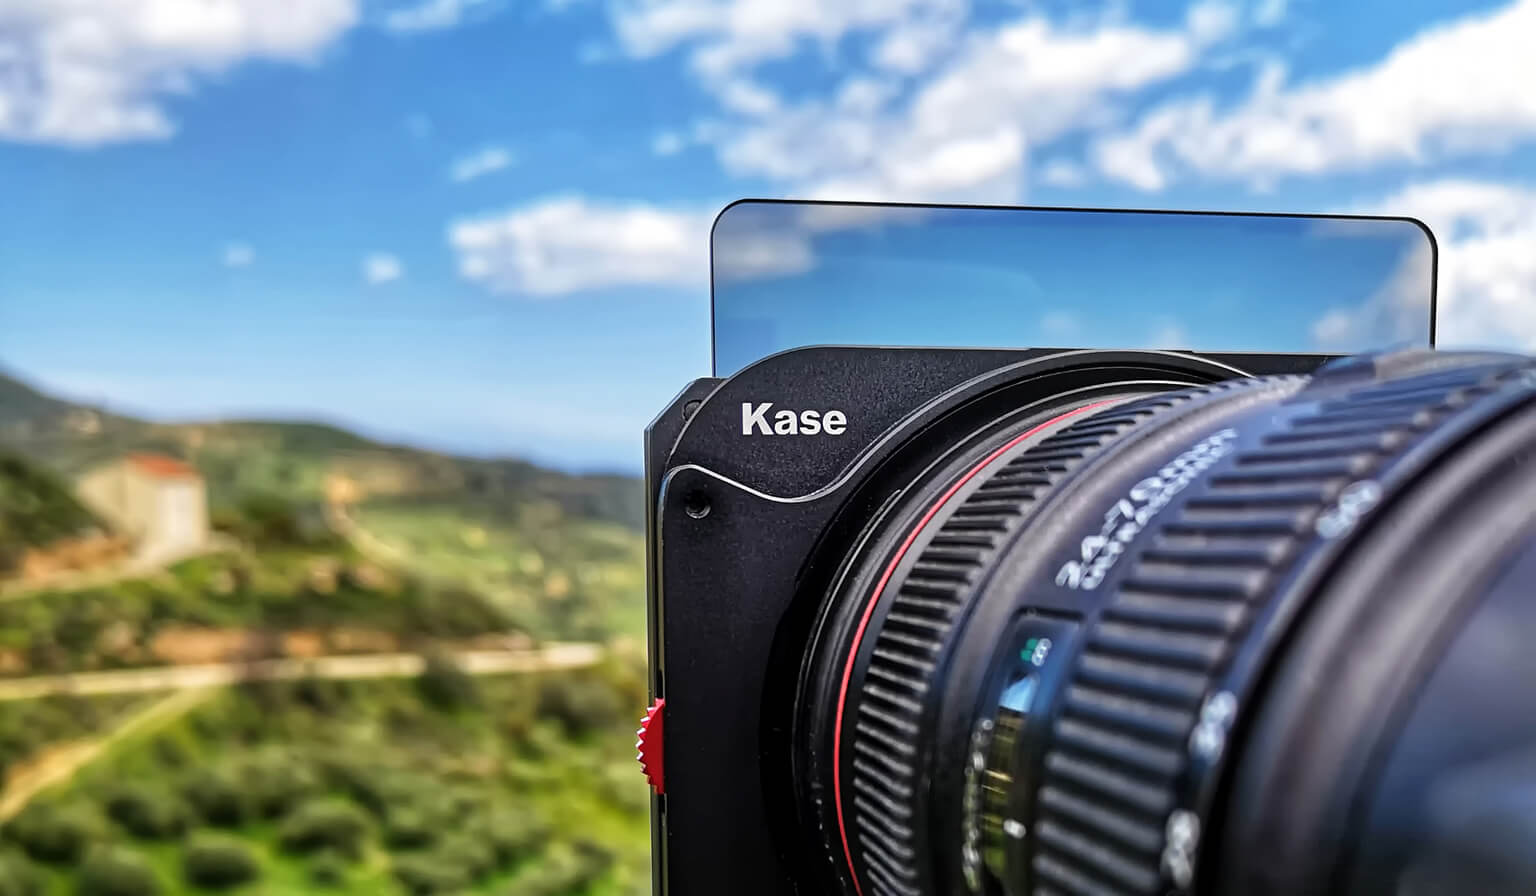 Kase Filters being used out on location in Crete, Greece - Image Melvin Nicholson Photography